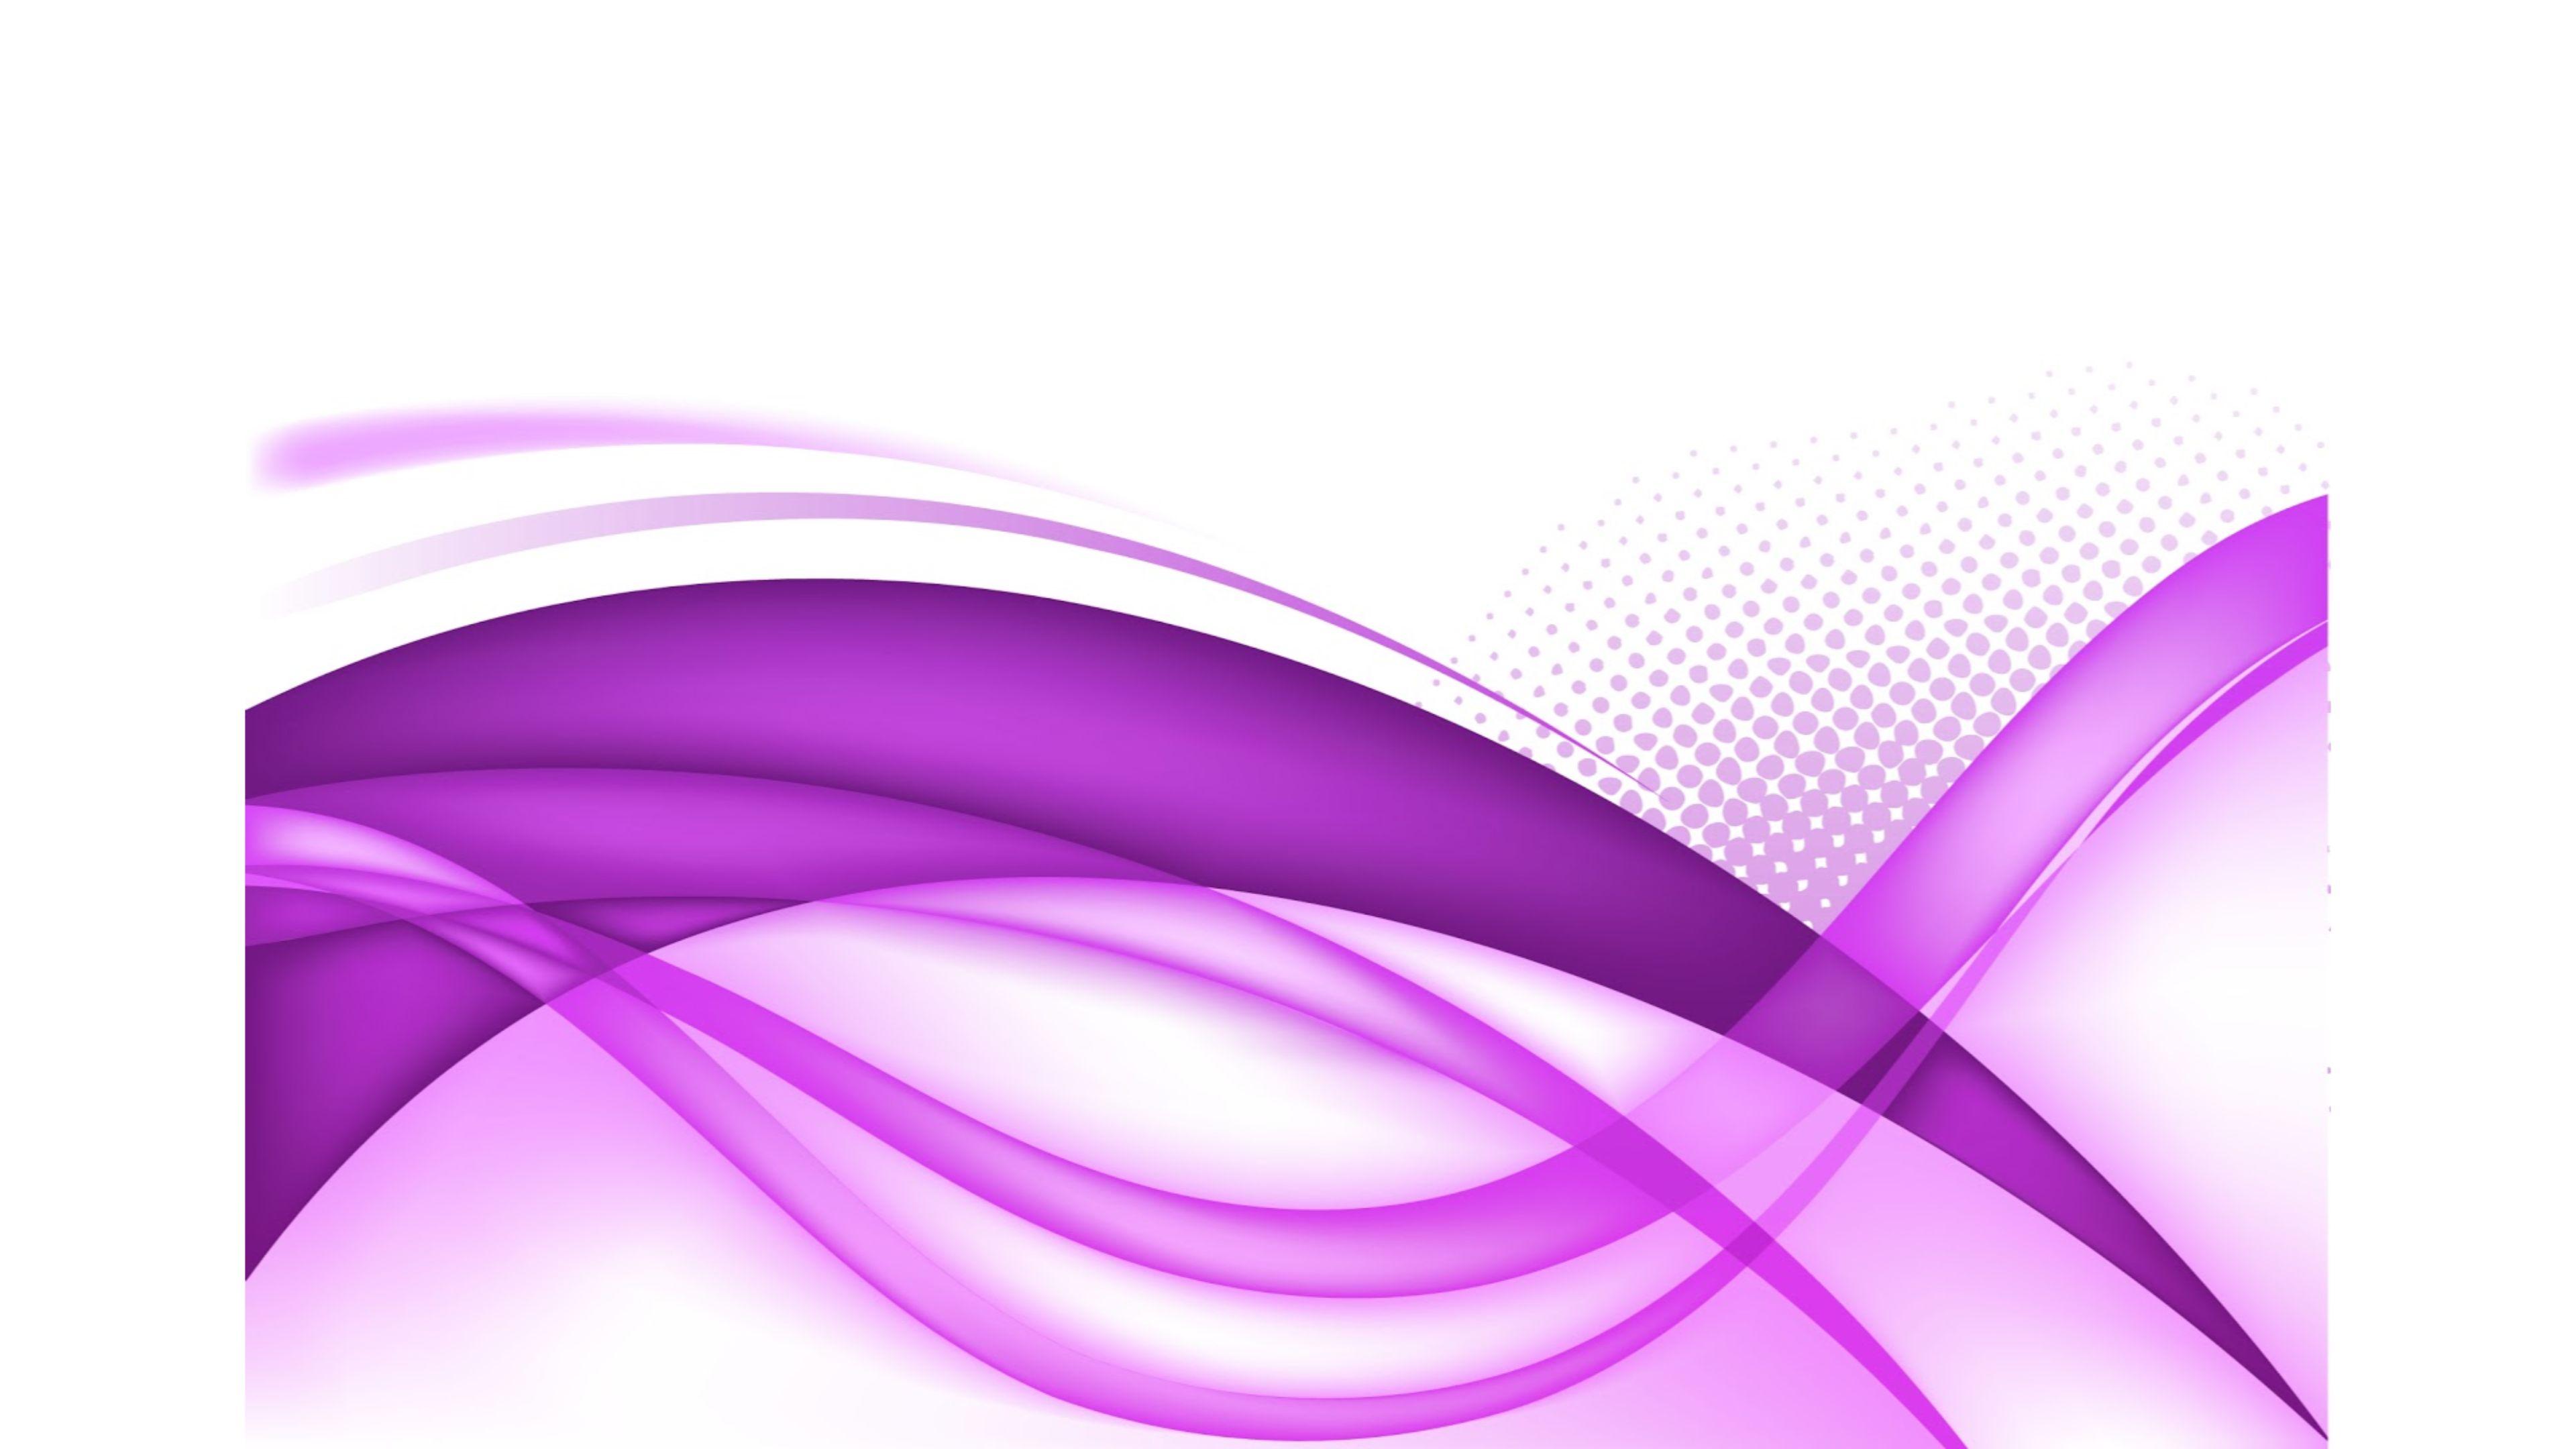  Purple  and White  Wallpapers  Top Free Purple  and White  